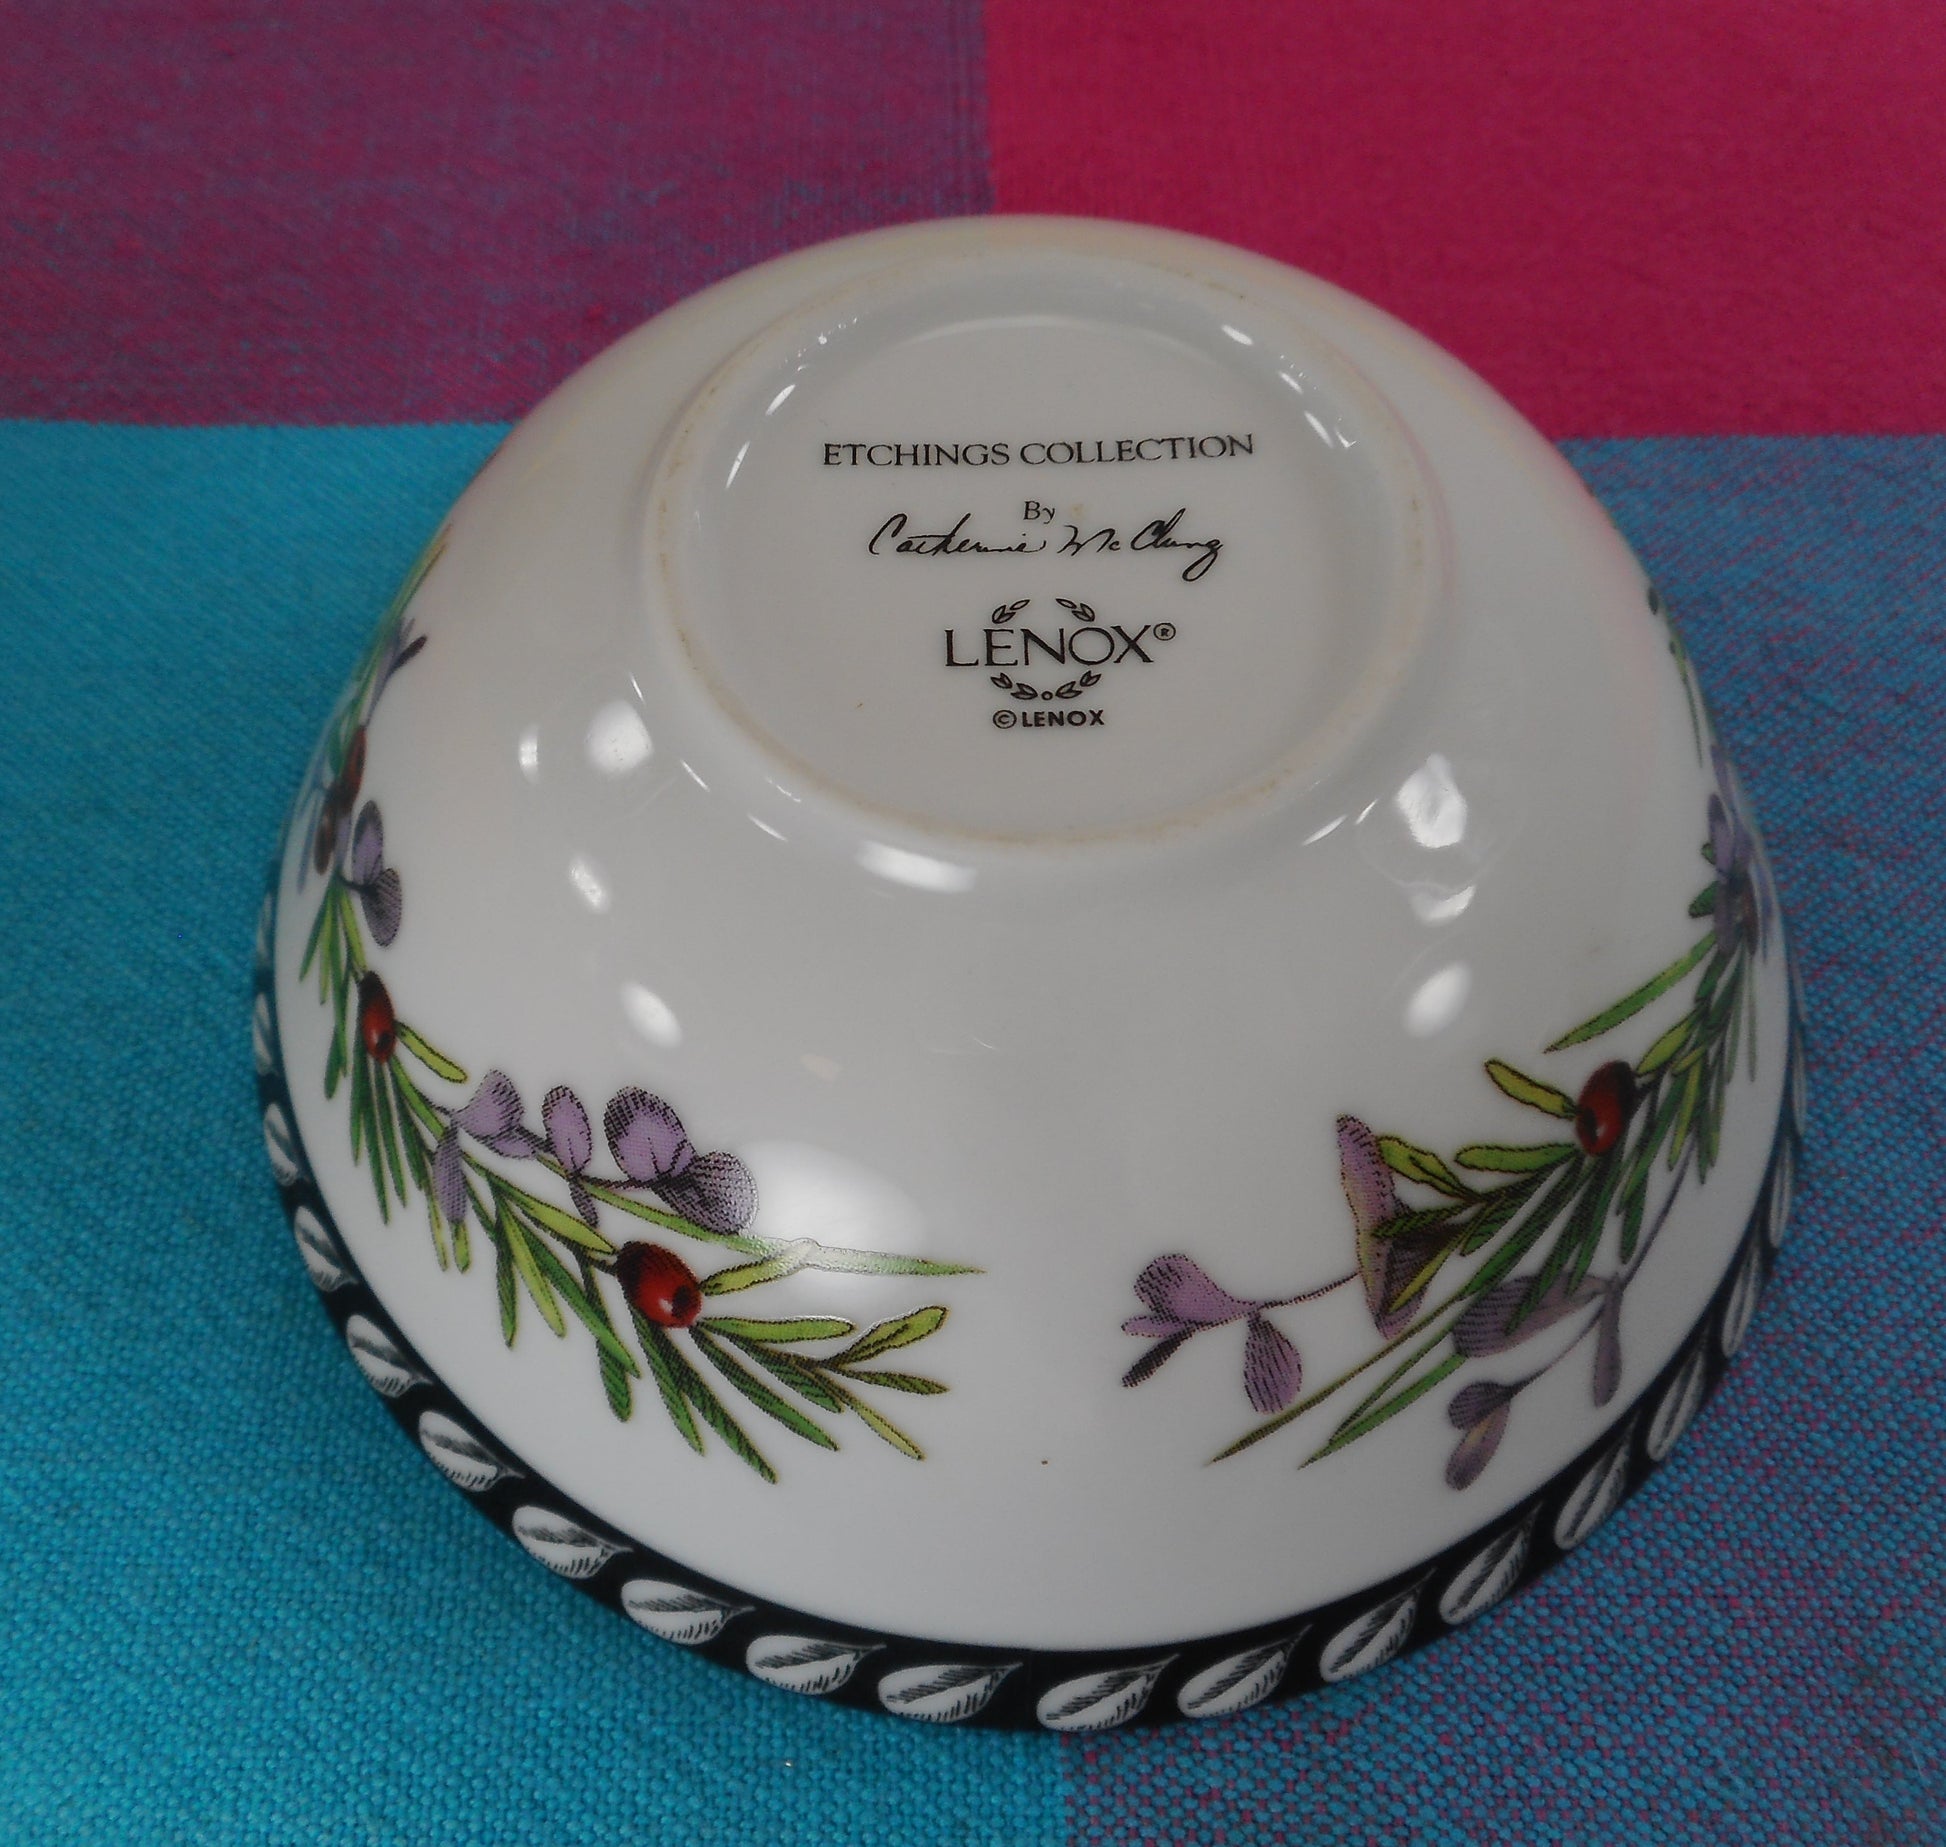 Lenox Porcelain Holiday Etchings Collection Replacement Dip Bowl 4.5" used